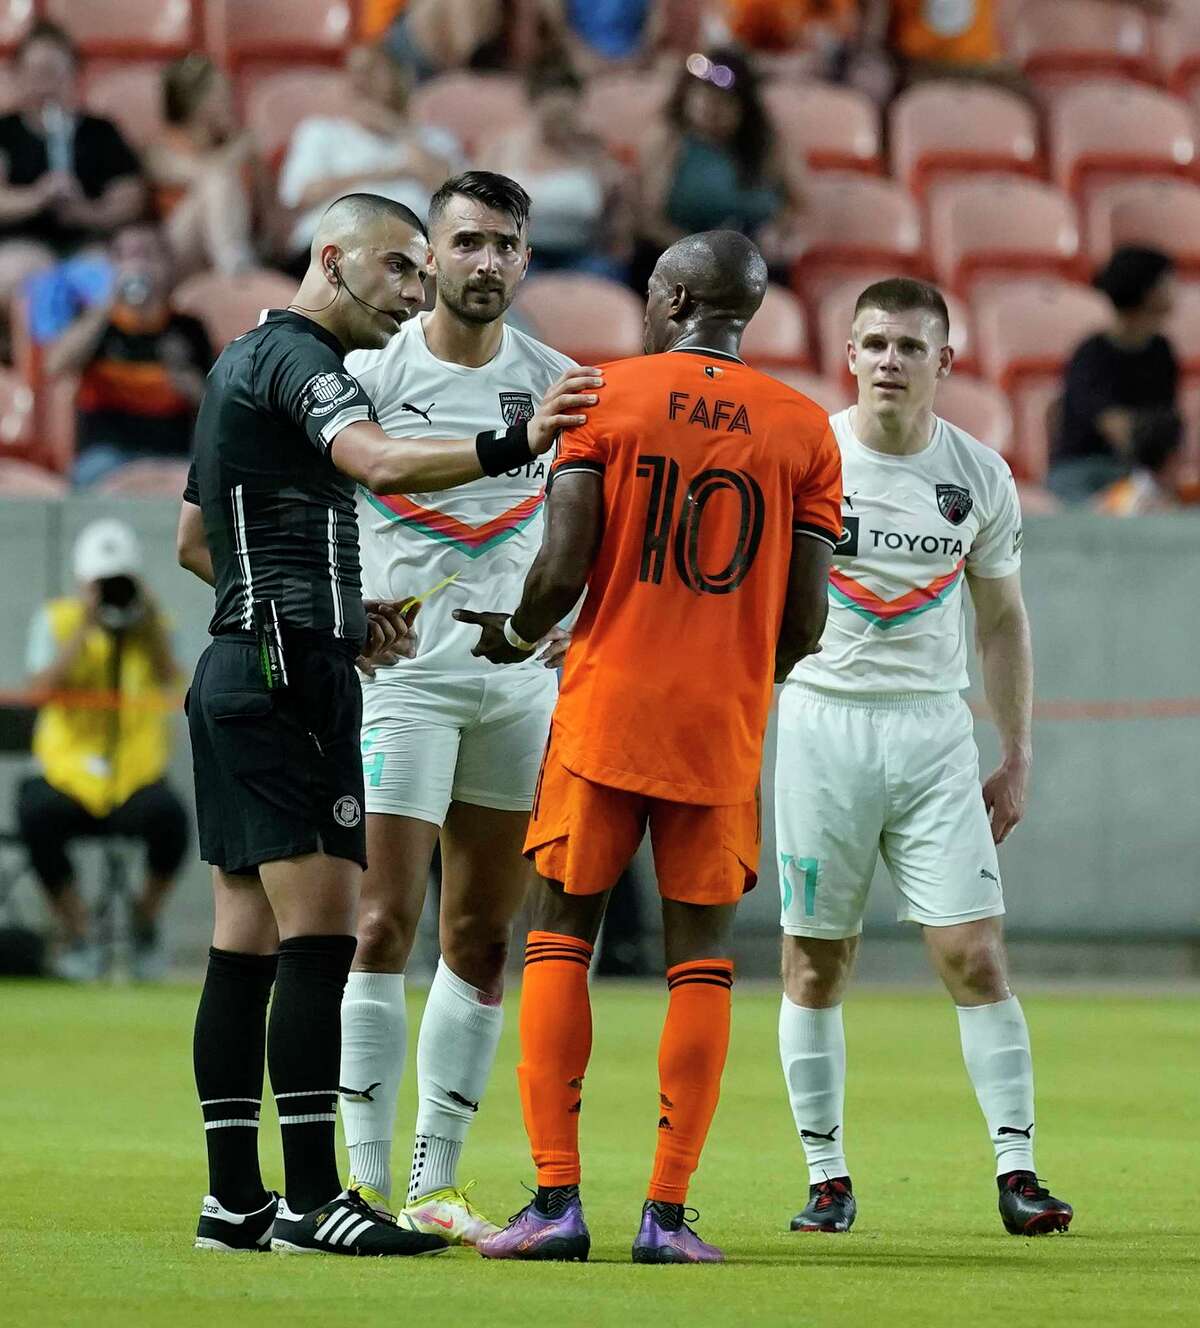 The referee speaks with Houston Dynamo midfielder Fafà Picault (10) and San Antonio FC defender Fabien Garcia (4) during the first half of the U.S. Open Cup soccer match at PNC Stadium on Wednesday, May 11, 2022 in Houston.